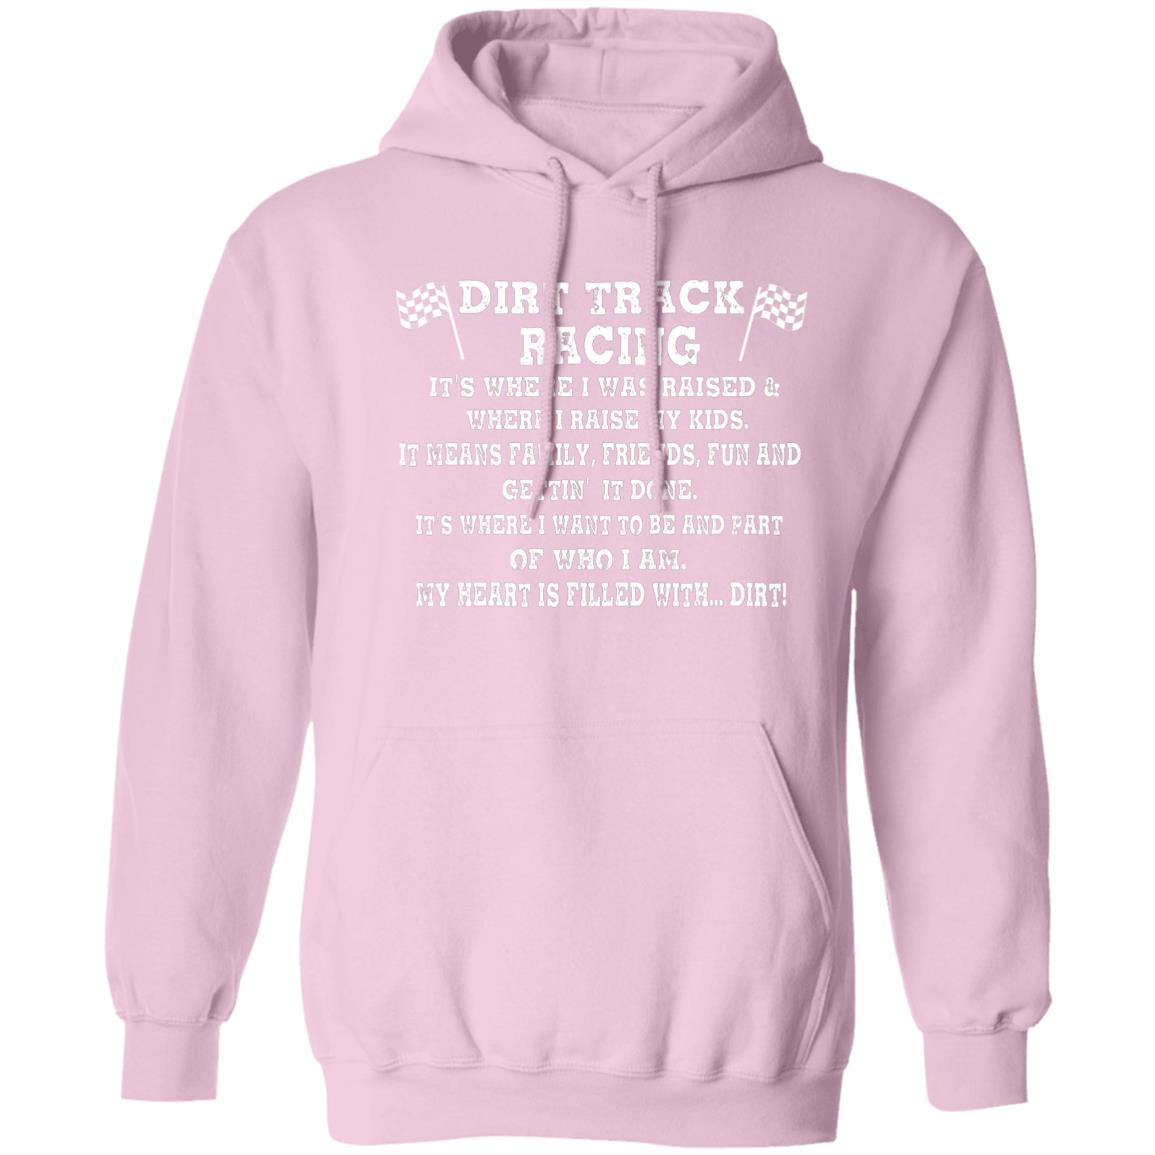 Dirt Track Racing It's Where I Was Raised Pullover Hoodie 8 oz (Closeout)